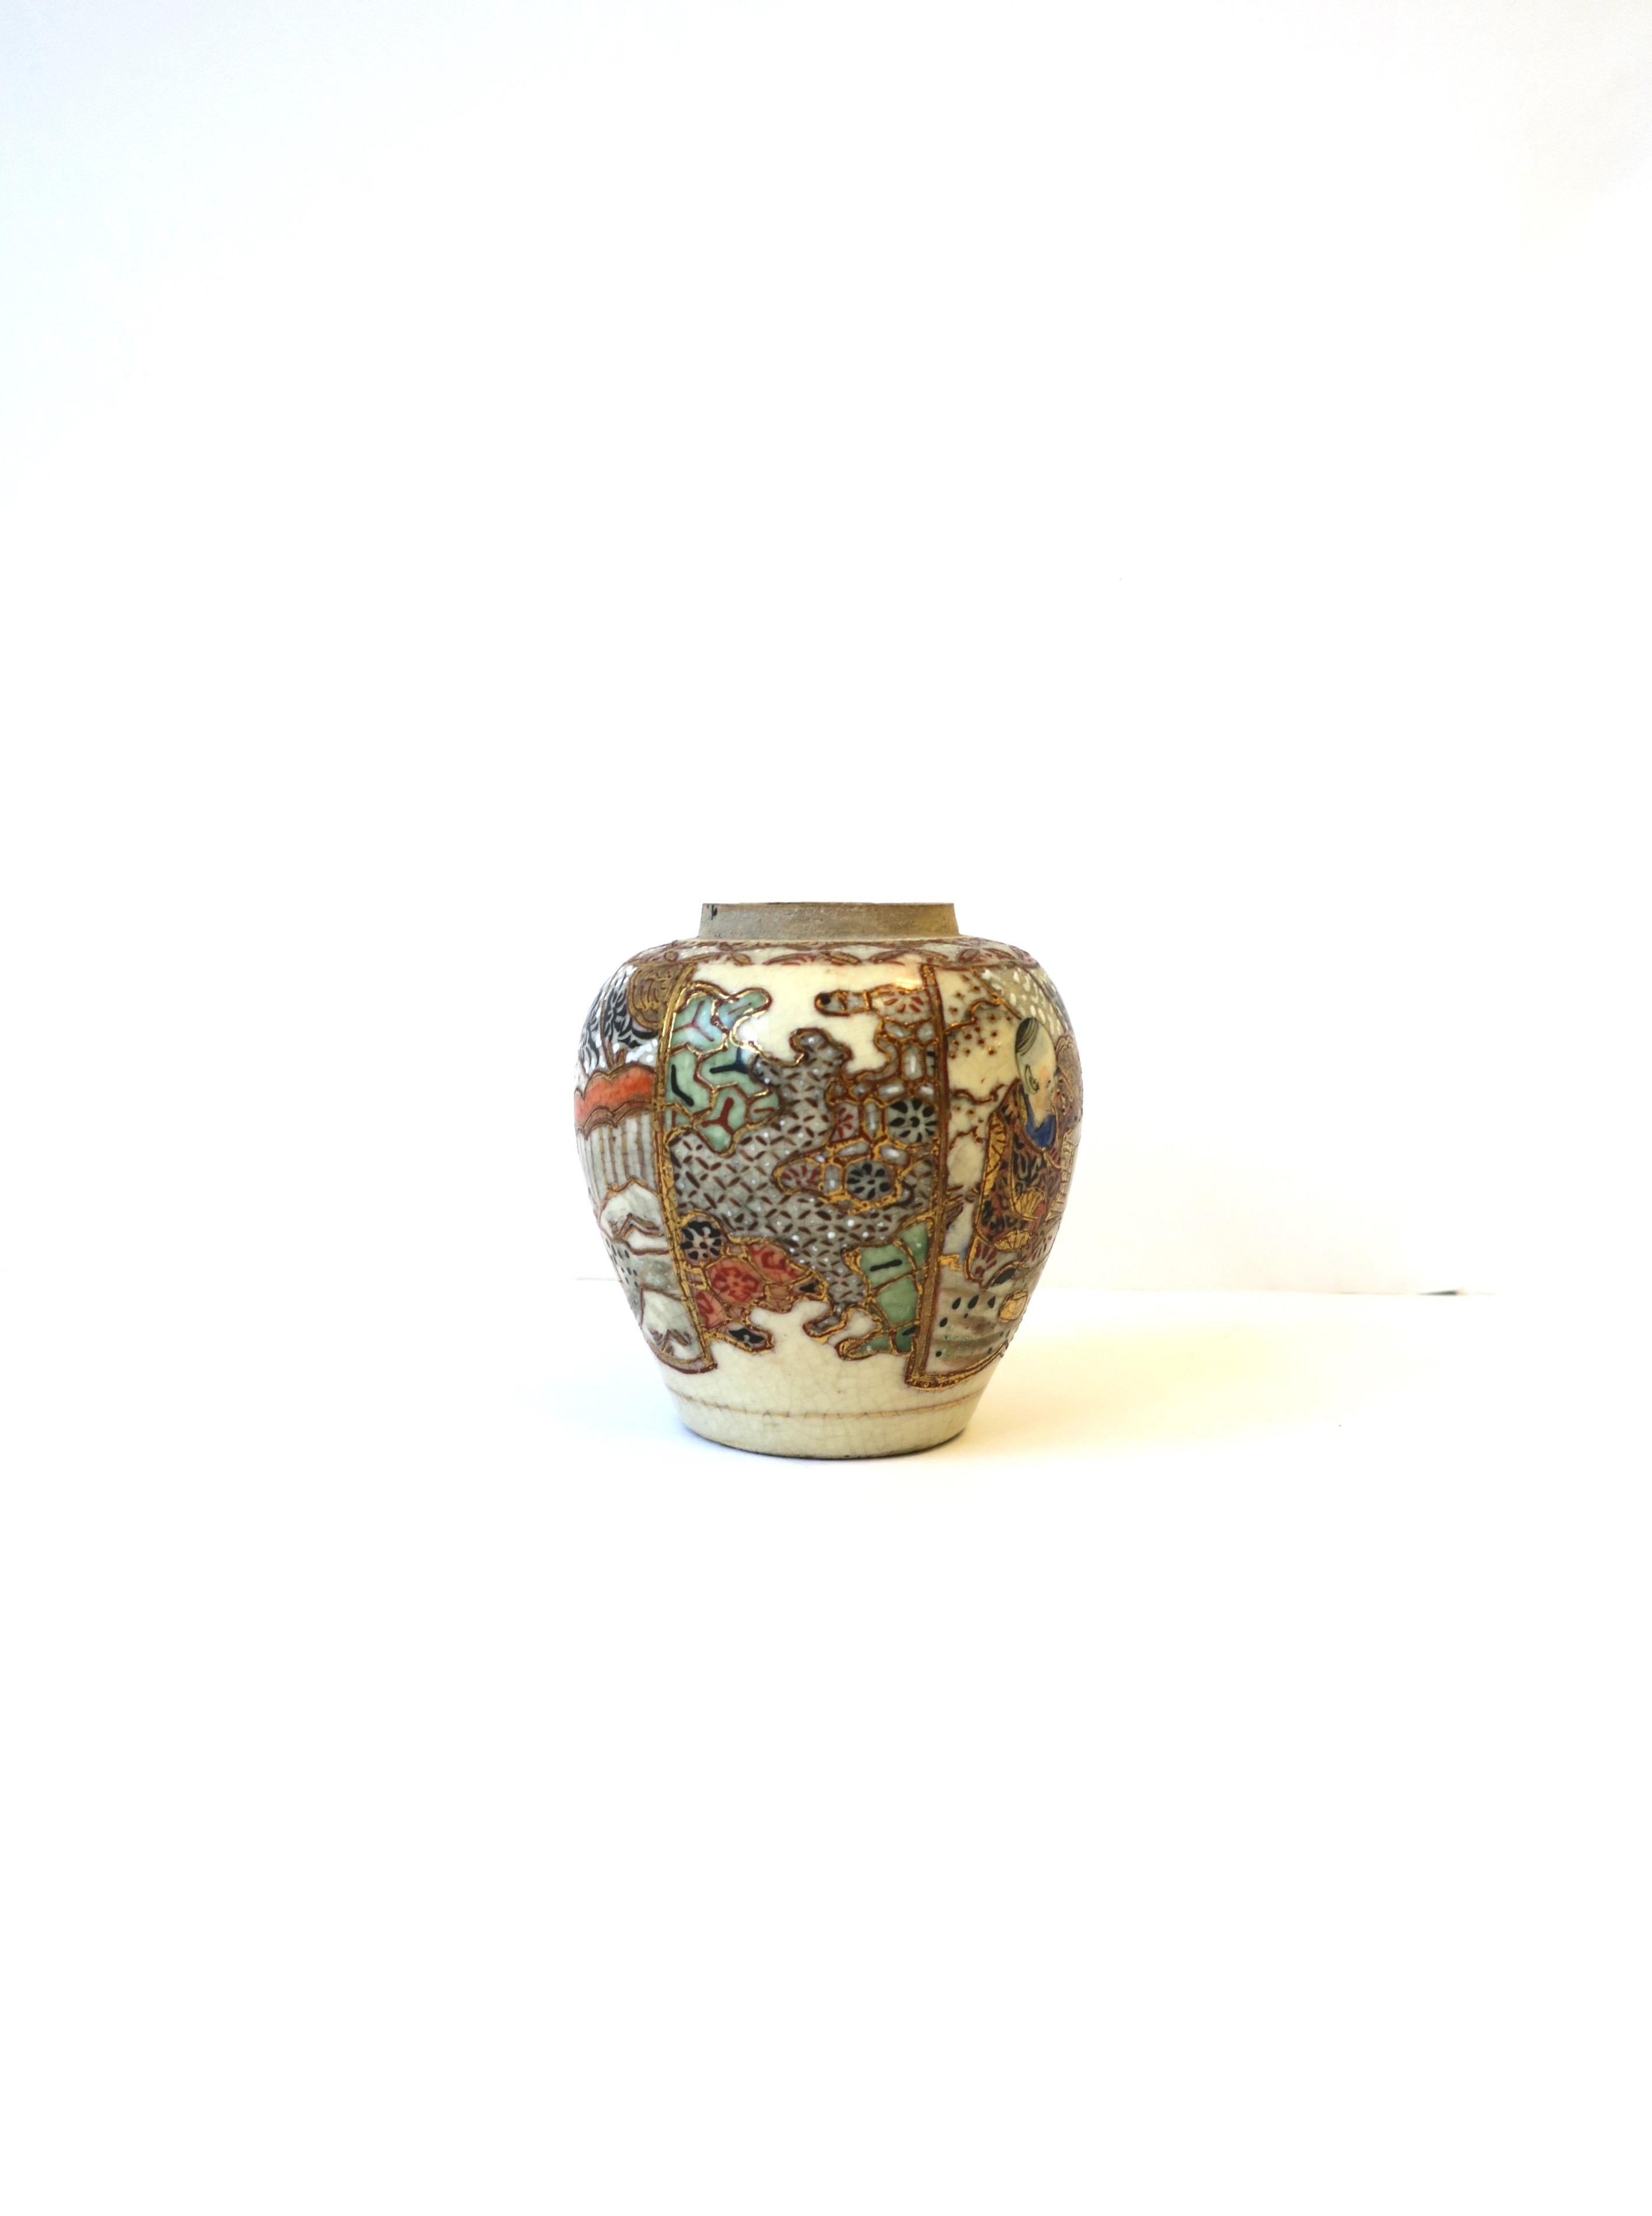 A beautiful small Japanese Satsuma ginger jar vase, circa early-20th century, Japan. Colors include cream, copper, green, blue, white, black, orange and touches of red burgundy. Dimensions: 3